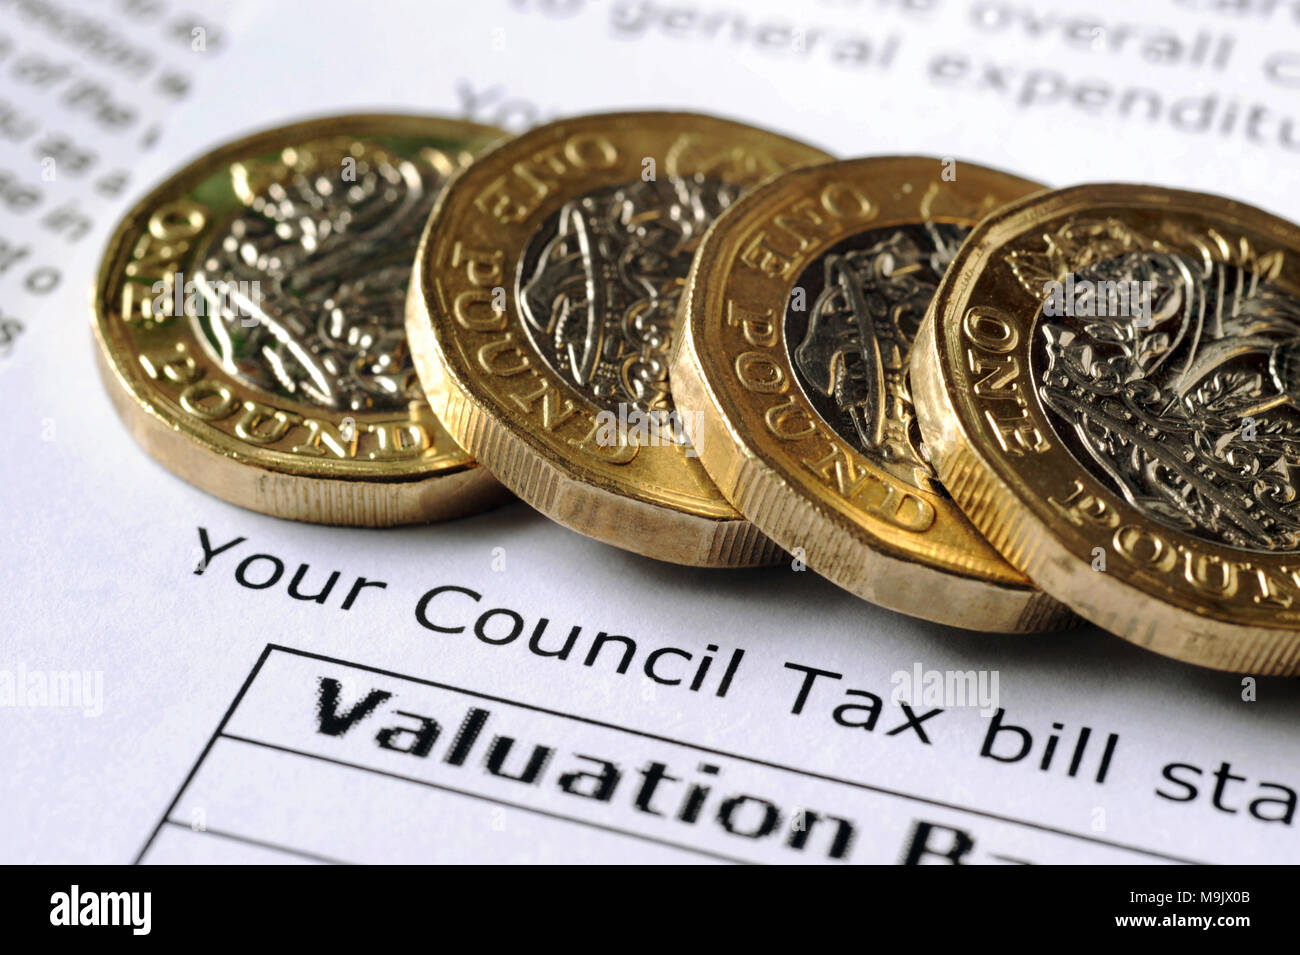 COUNCIL TAX BILL WITH NEW ONE POUND COINS RE HOUSING BANDS GOVERNMENT COUNCILS PRICE RISES HOUSEHOLD BUDGETS VALUES ETC UK Stock Photo